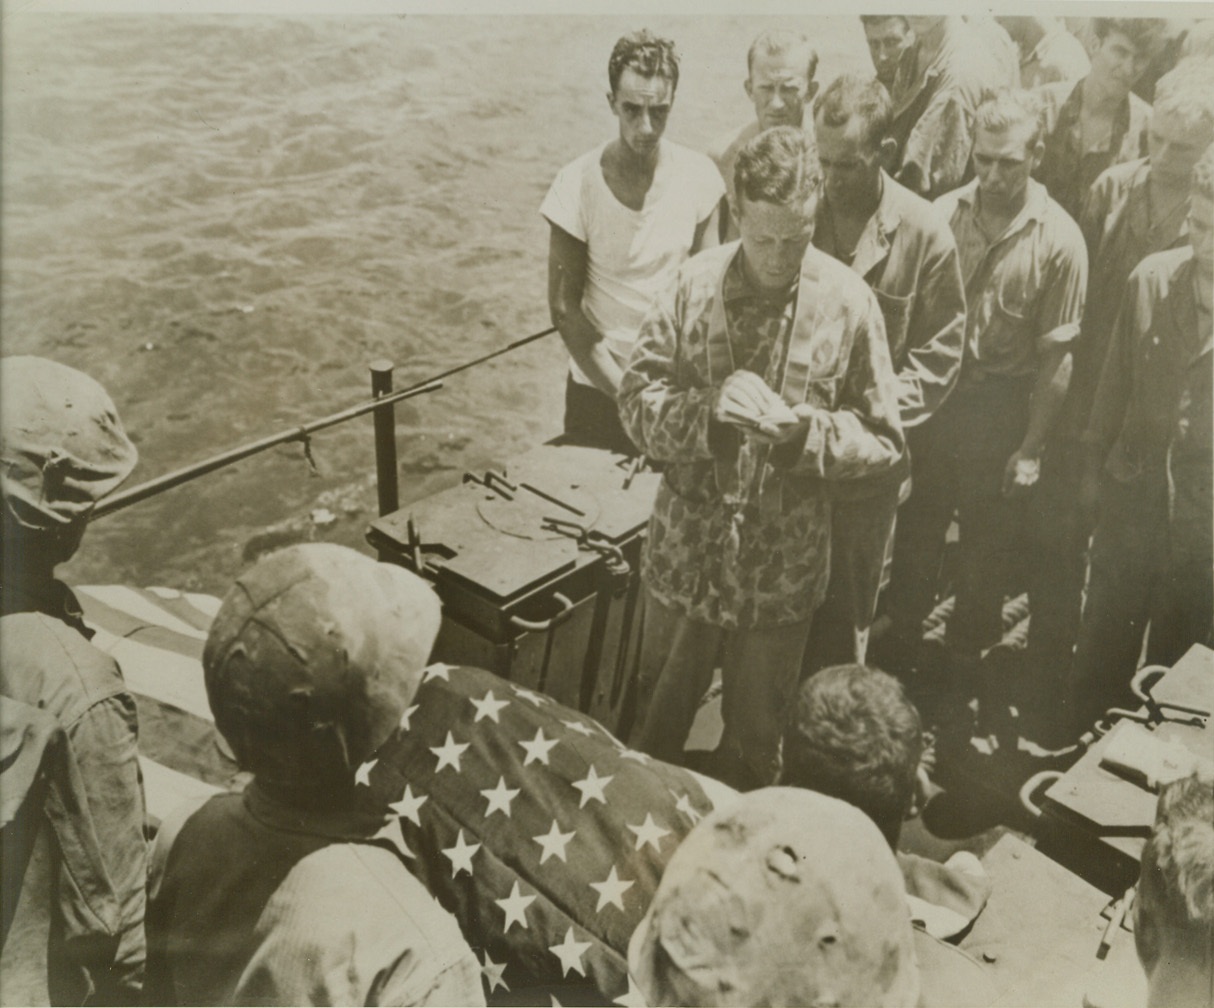 LAST RITES FOR MARINE, 8/8/1944. SOMEWHERE IN THE PACIFIC – Still wearing his camouflaged tunic, Lt. (JG) Joseph P. F. Gallagher, USNR, Catholic Chaplain, 840 Grand Concourse, Bronx, N.Y., reads the burial service for a Marine who died in the assault on Tinian Island. His friends form an Honor Guard for the burial at sea. Credit: U.S. Marine Corp photo via OWI Radiophoto from ACME;